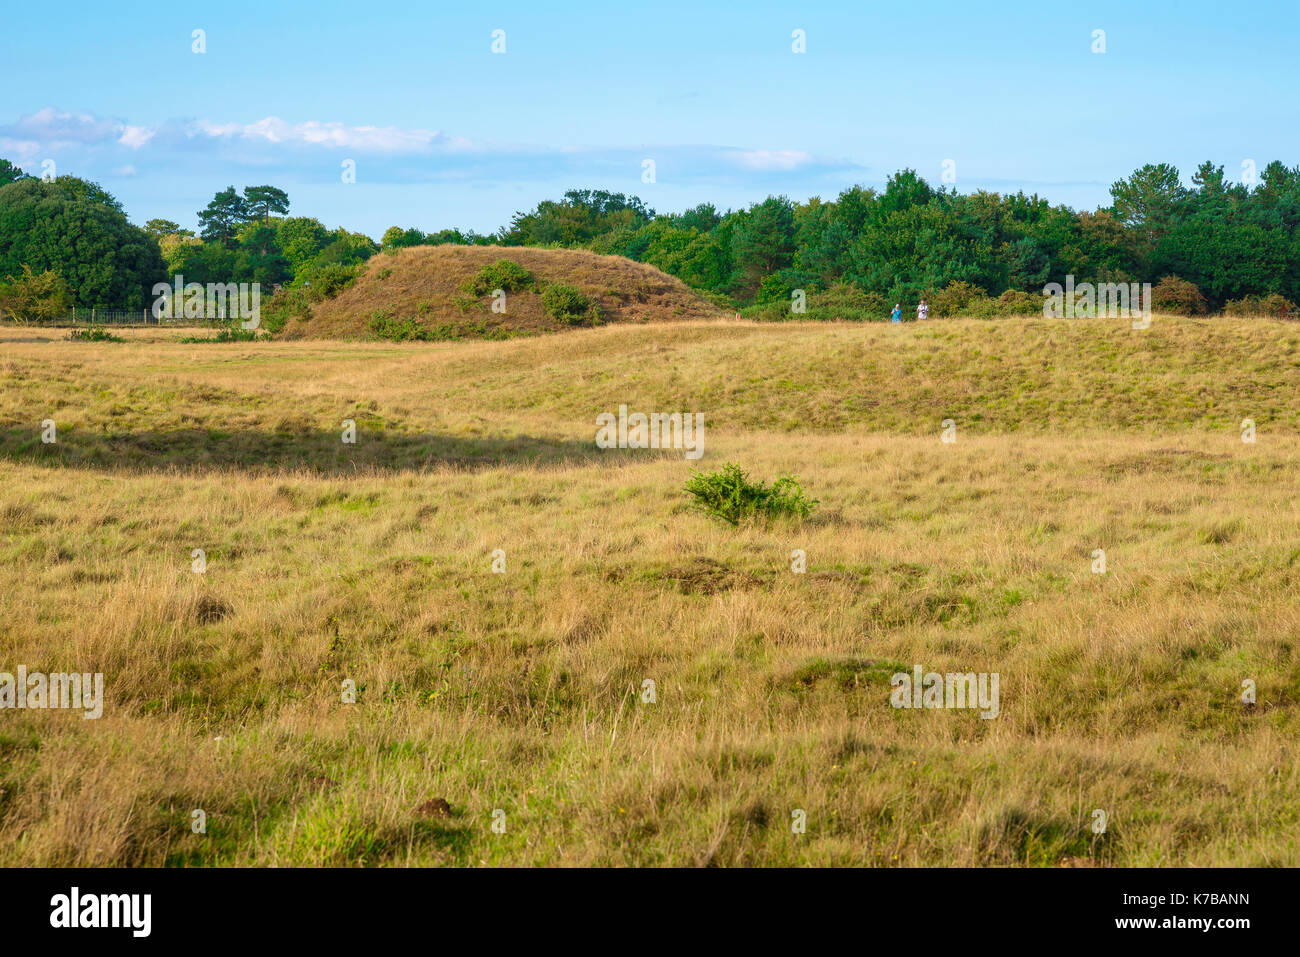 Sutton Hoo burial mound Suffolk, view of large Anglo Saxon burial mound at Sutton Hoo, Suffolk, England, UK. Stock Photo